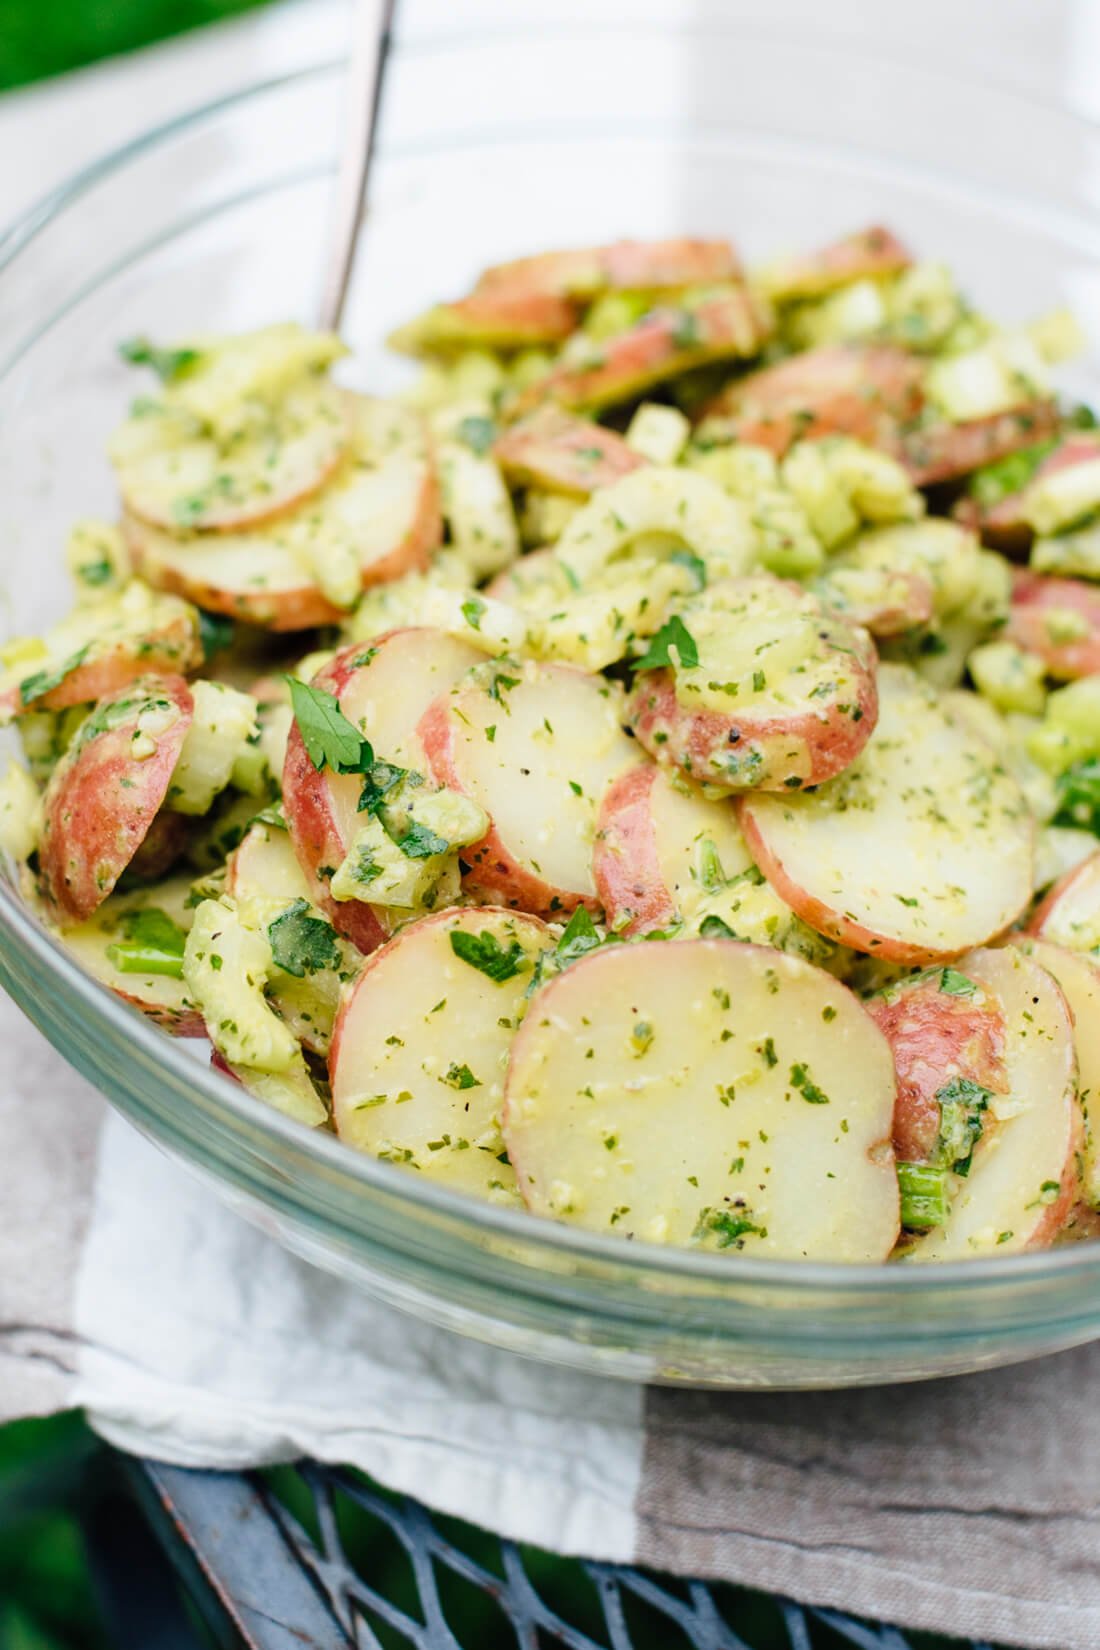 Healthy potato salad made with fresh herbs! So simple and so good. cookieandkate.com